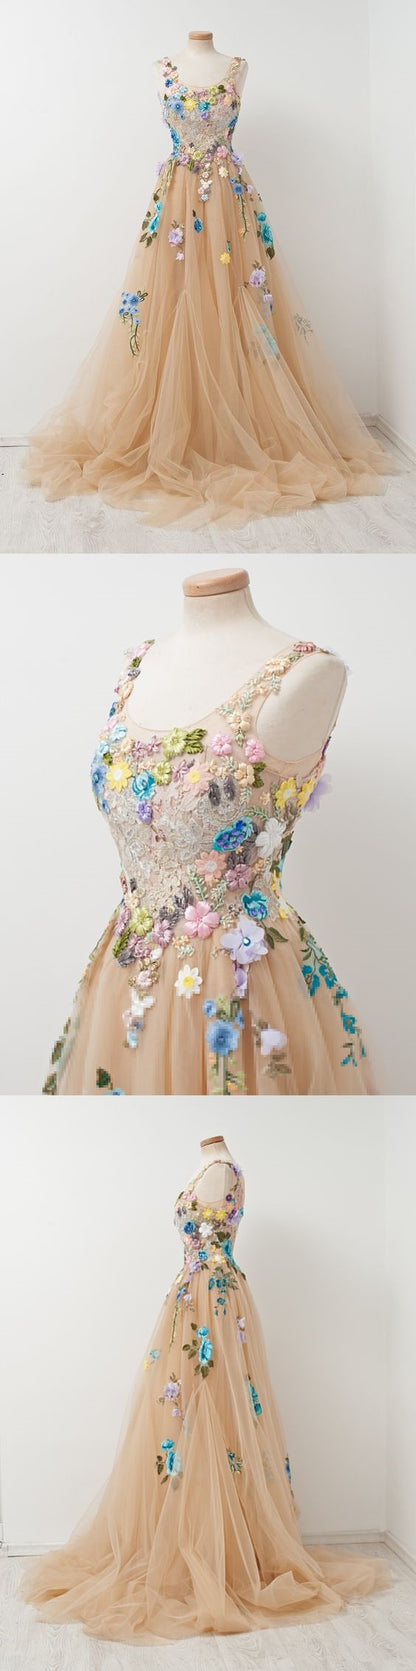 Floral Champagne Tulle FLowy Prom Dress - DollyGown